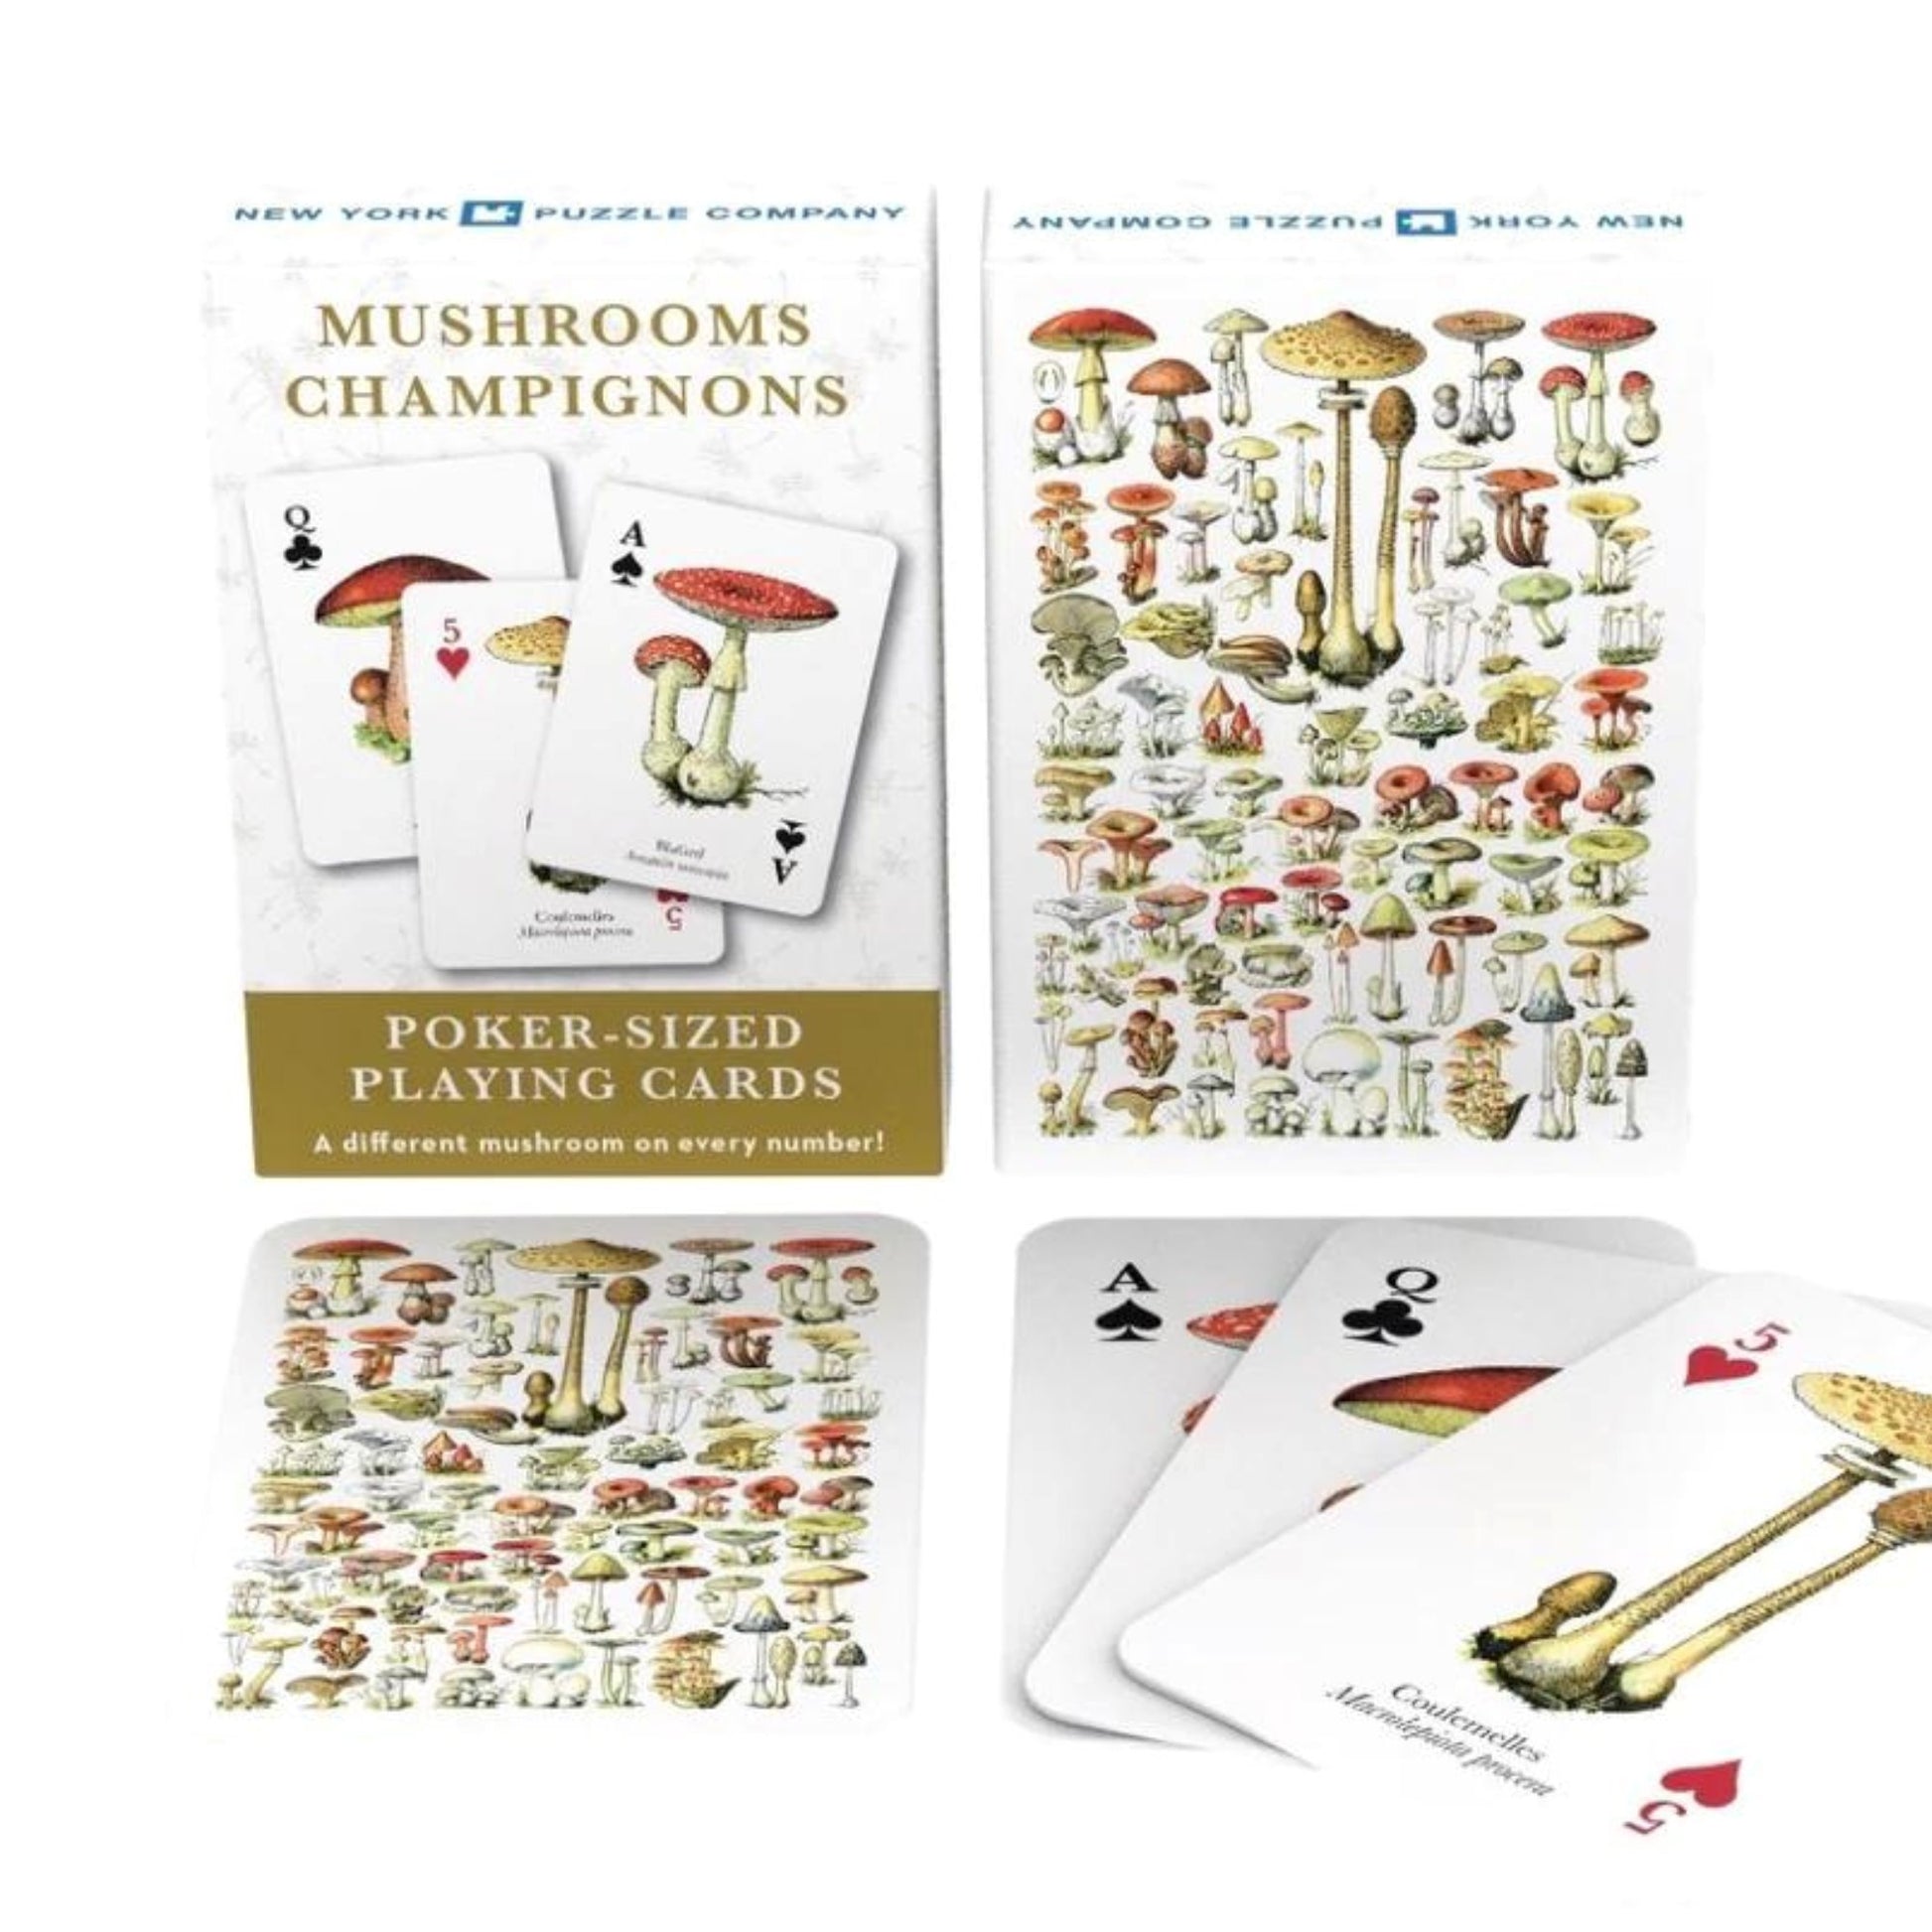 Mushrooms (Champignons) Art Illustrated Playing Cards Playing Cards - Alder & Alouette